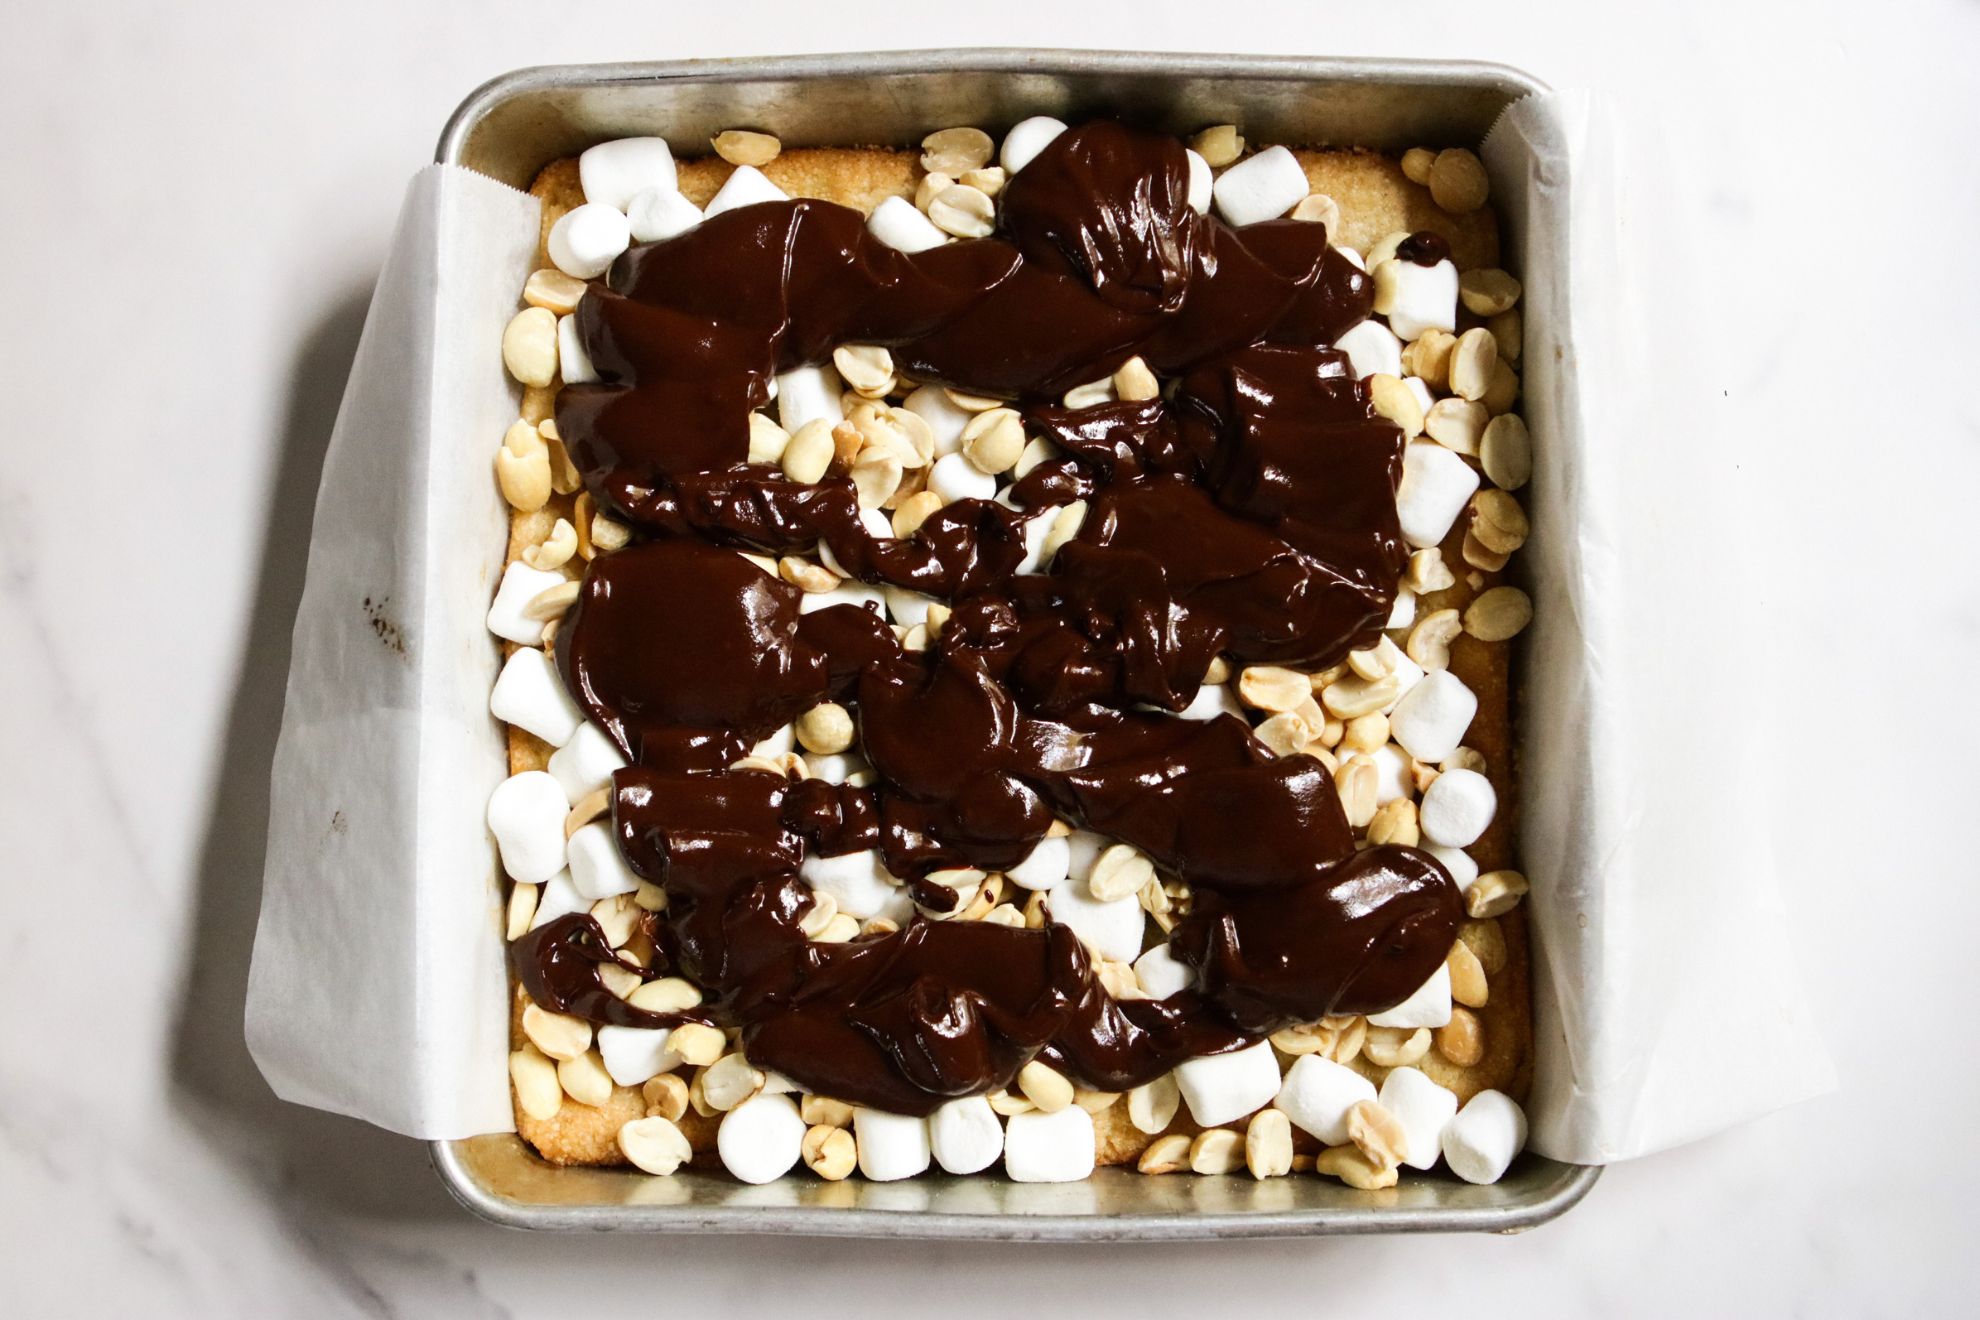 This is an overhead horizontal image of a square pan lined with parchment paprt. It has a shortbread crust with mini marshmallows, peanuts, and chocolate drizzled on top. The square sits on a white marble counter.